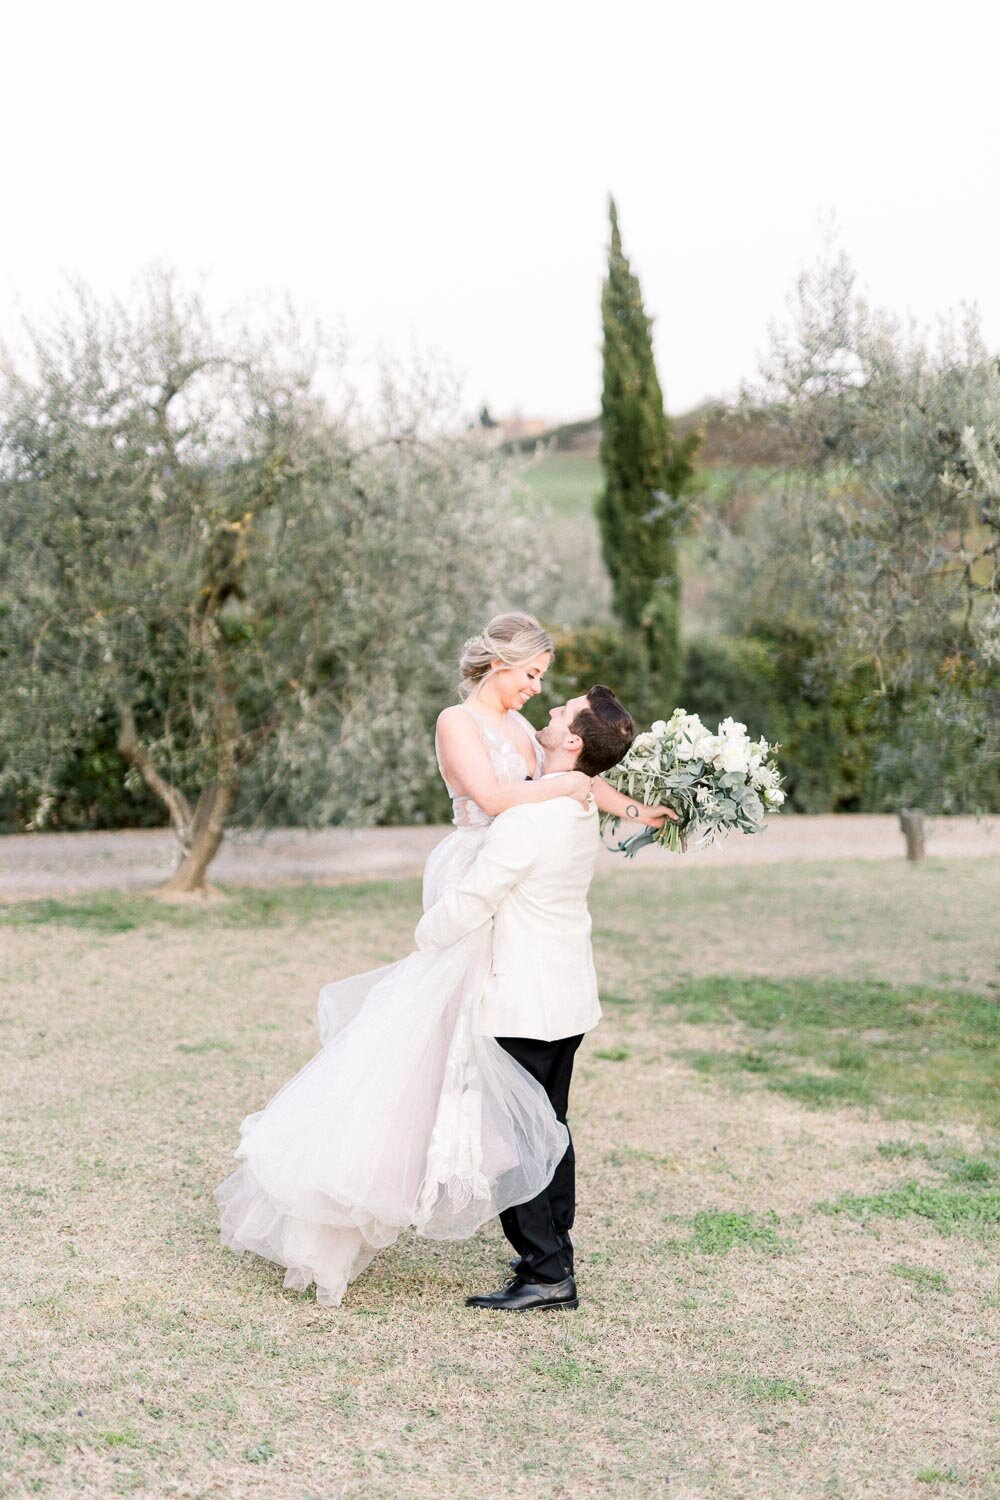 Bride and groom portrait in Tuscany